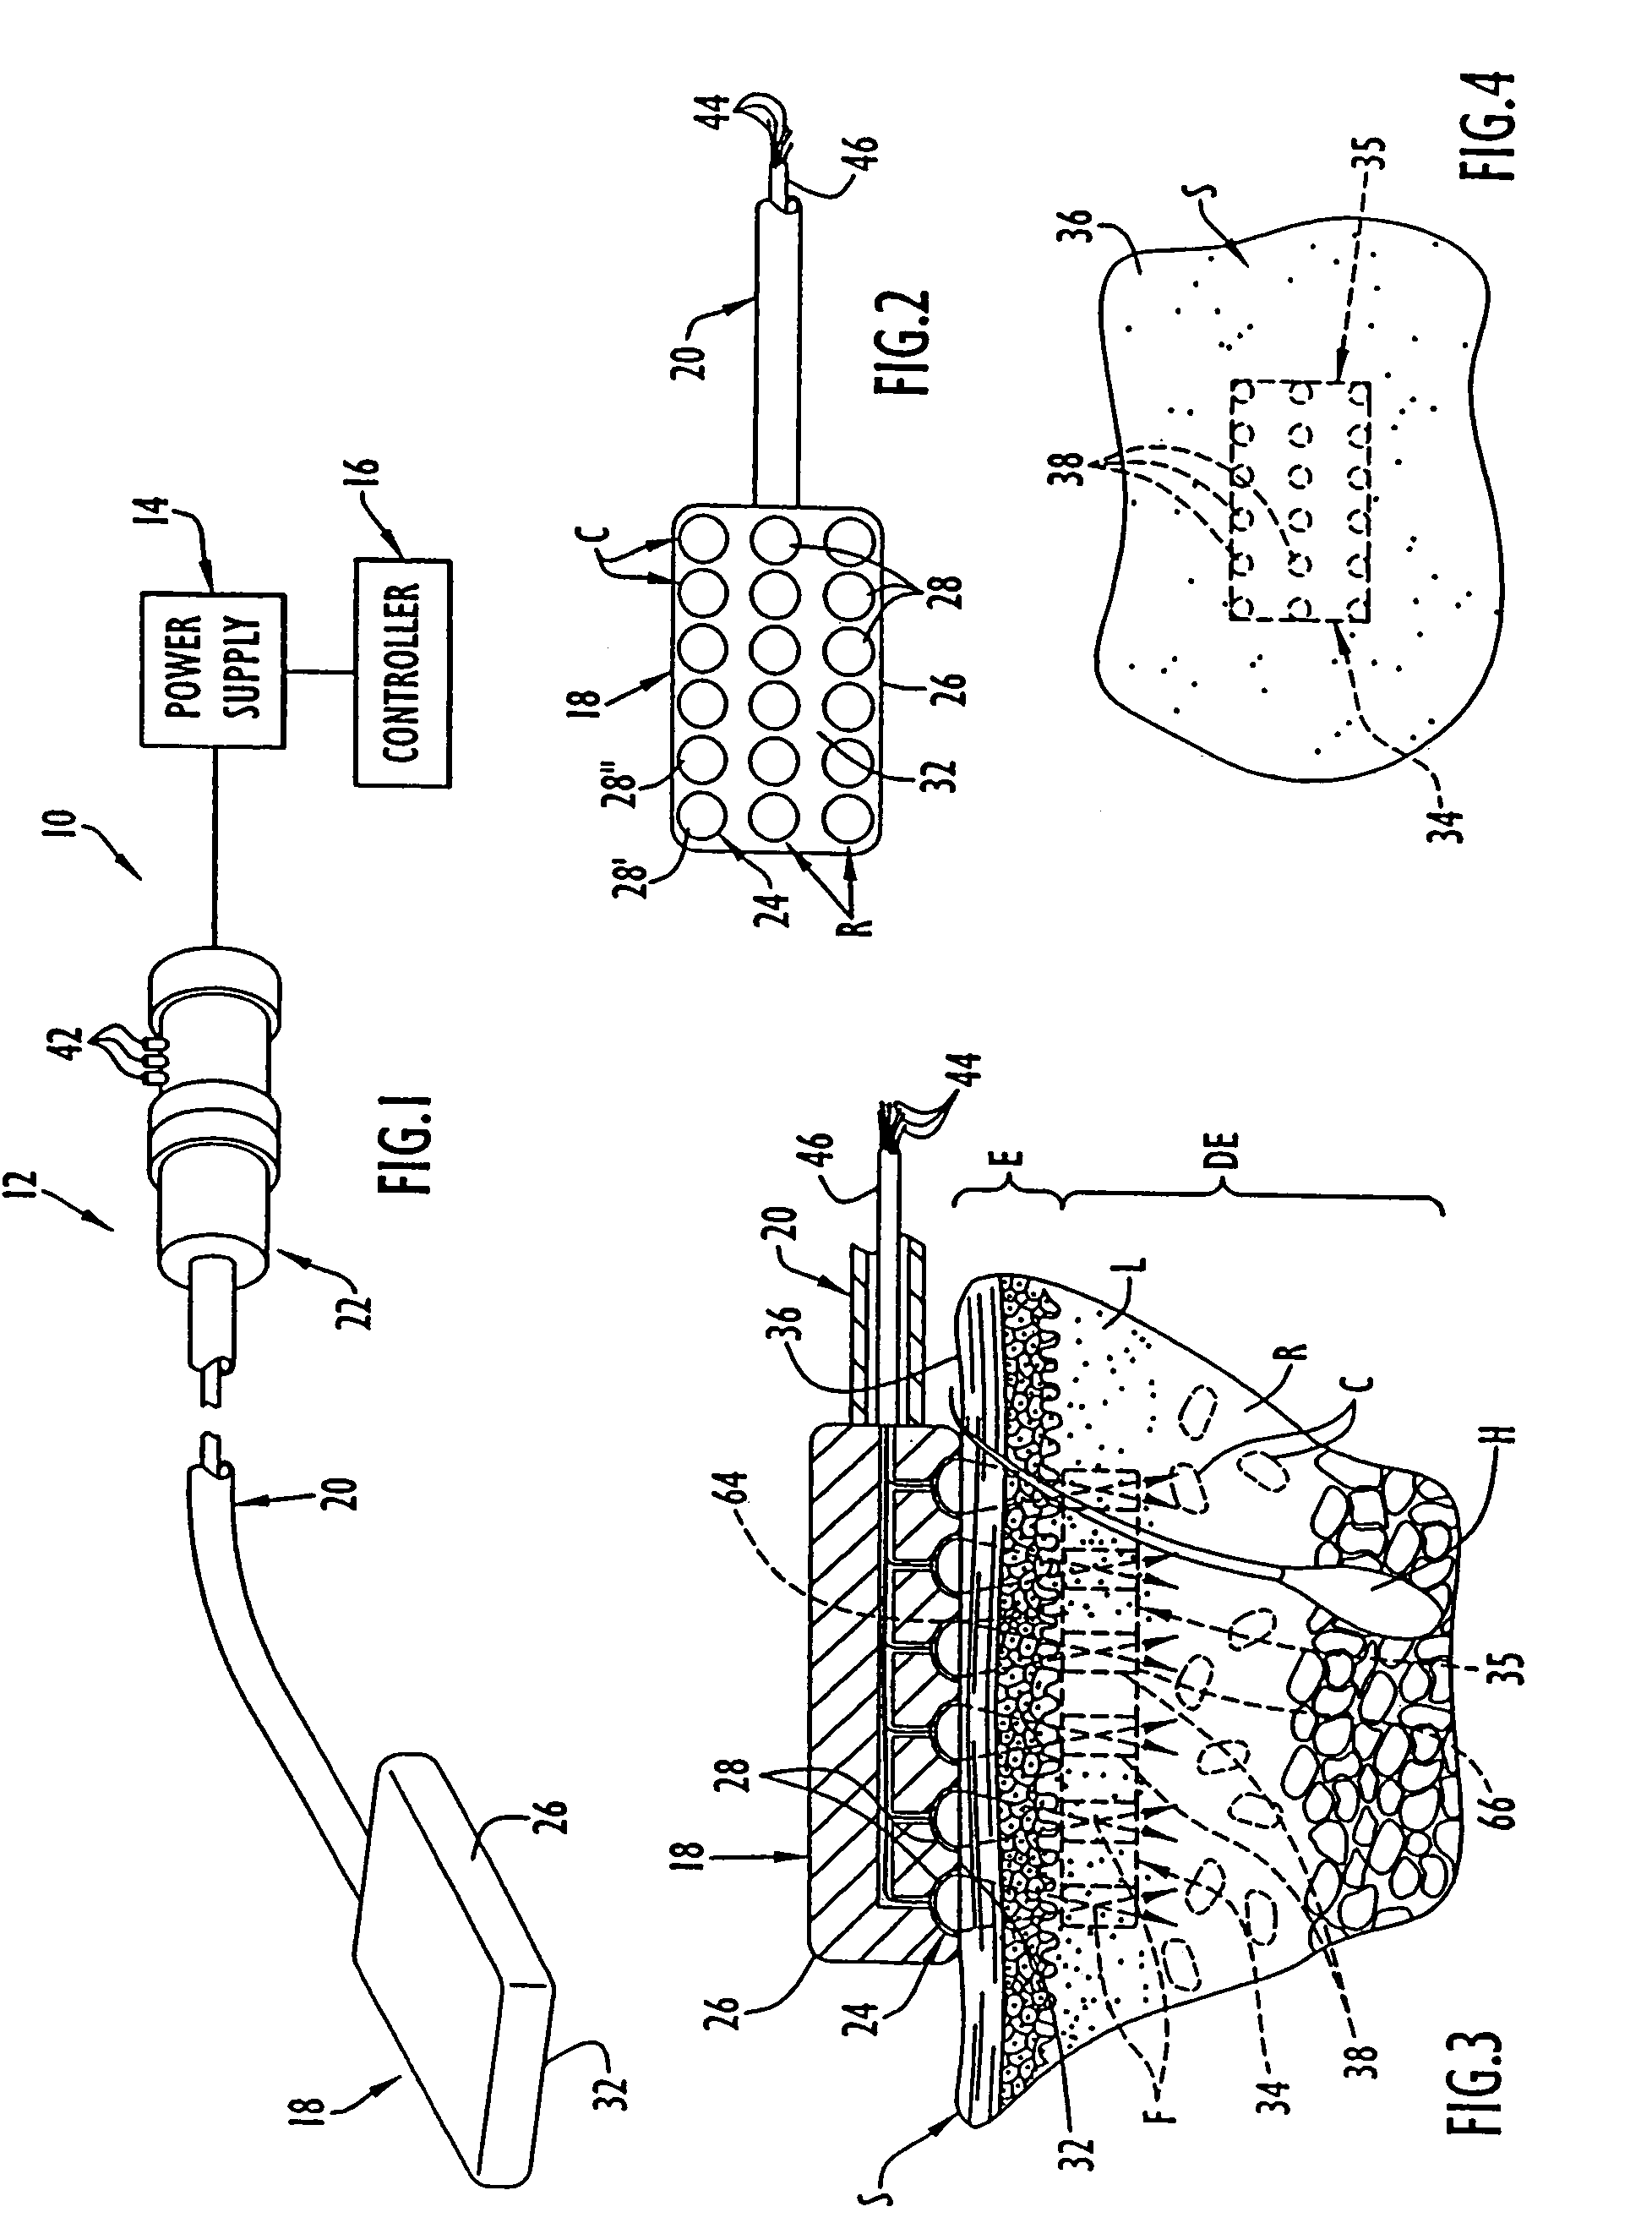 Methods of using high intensity focused ultrasound to form an ablated tissue area